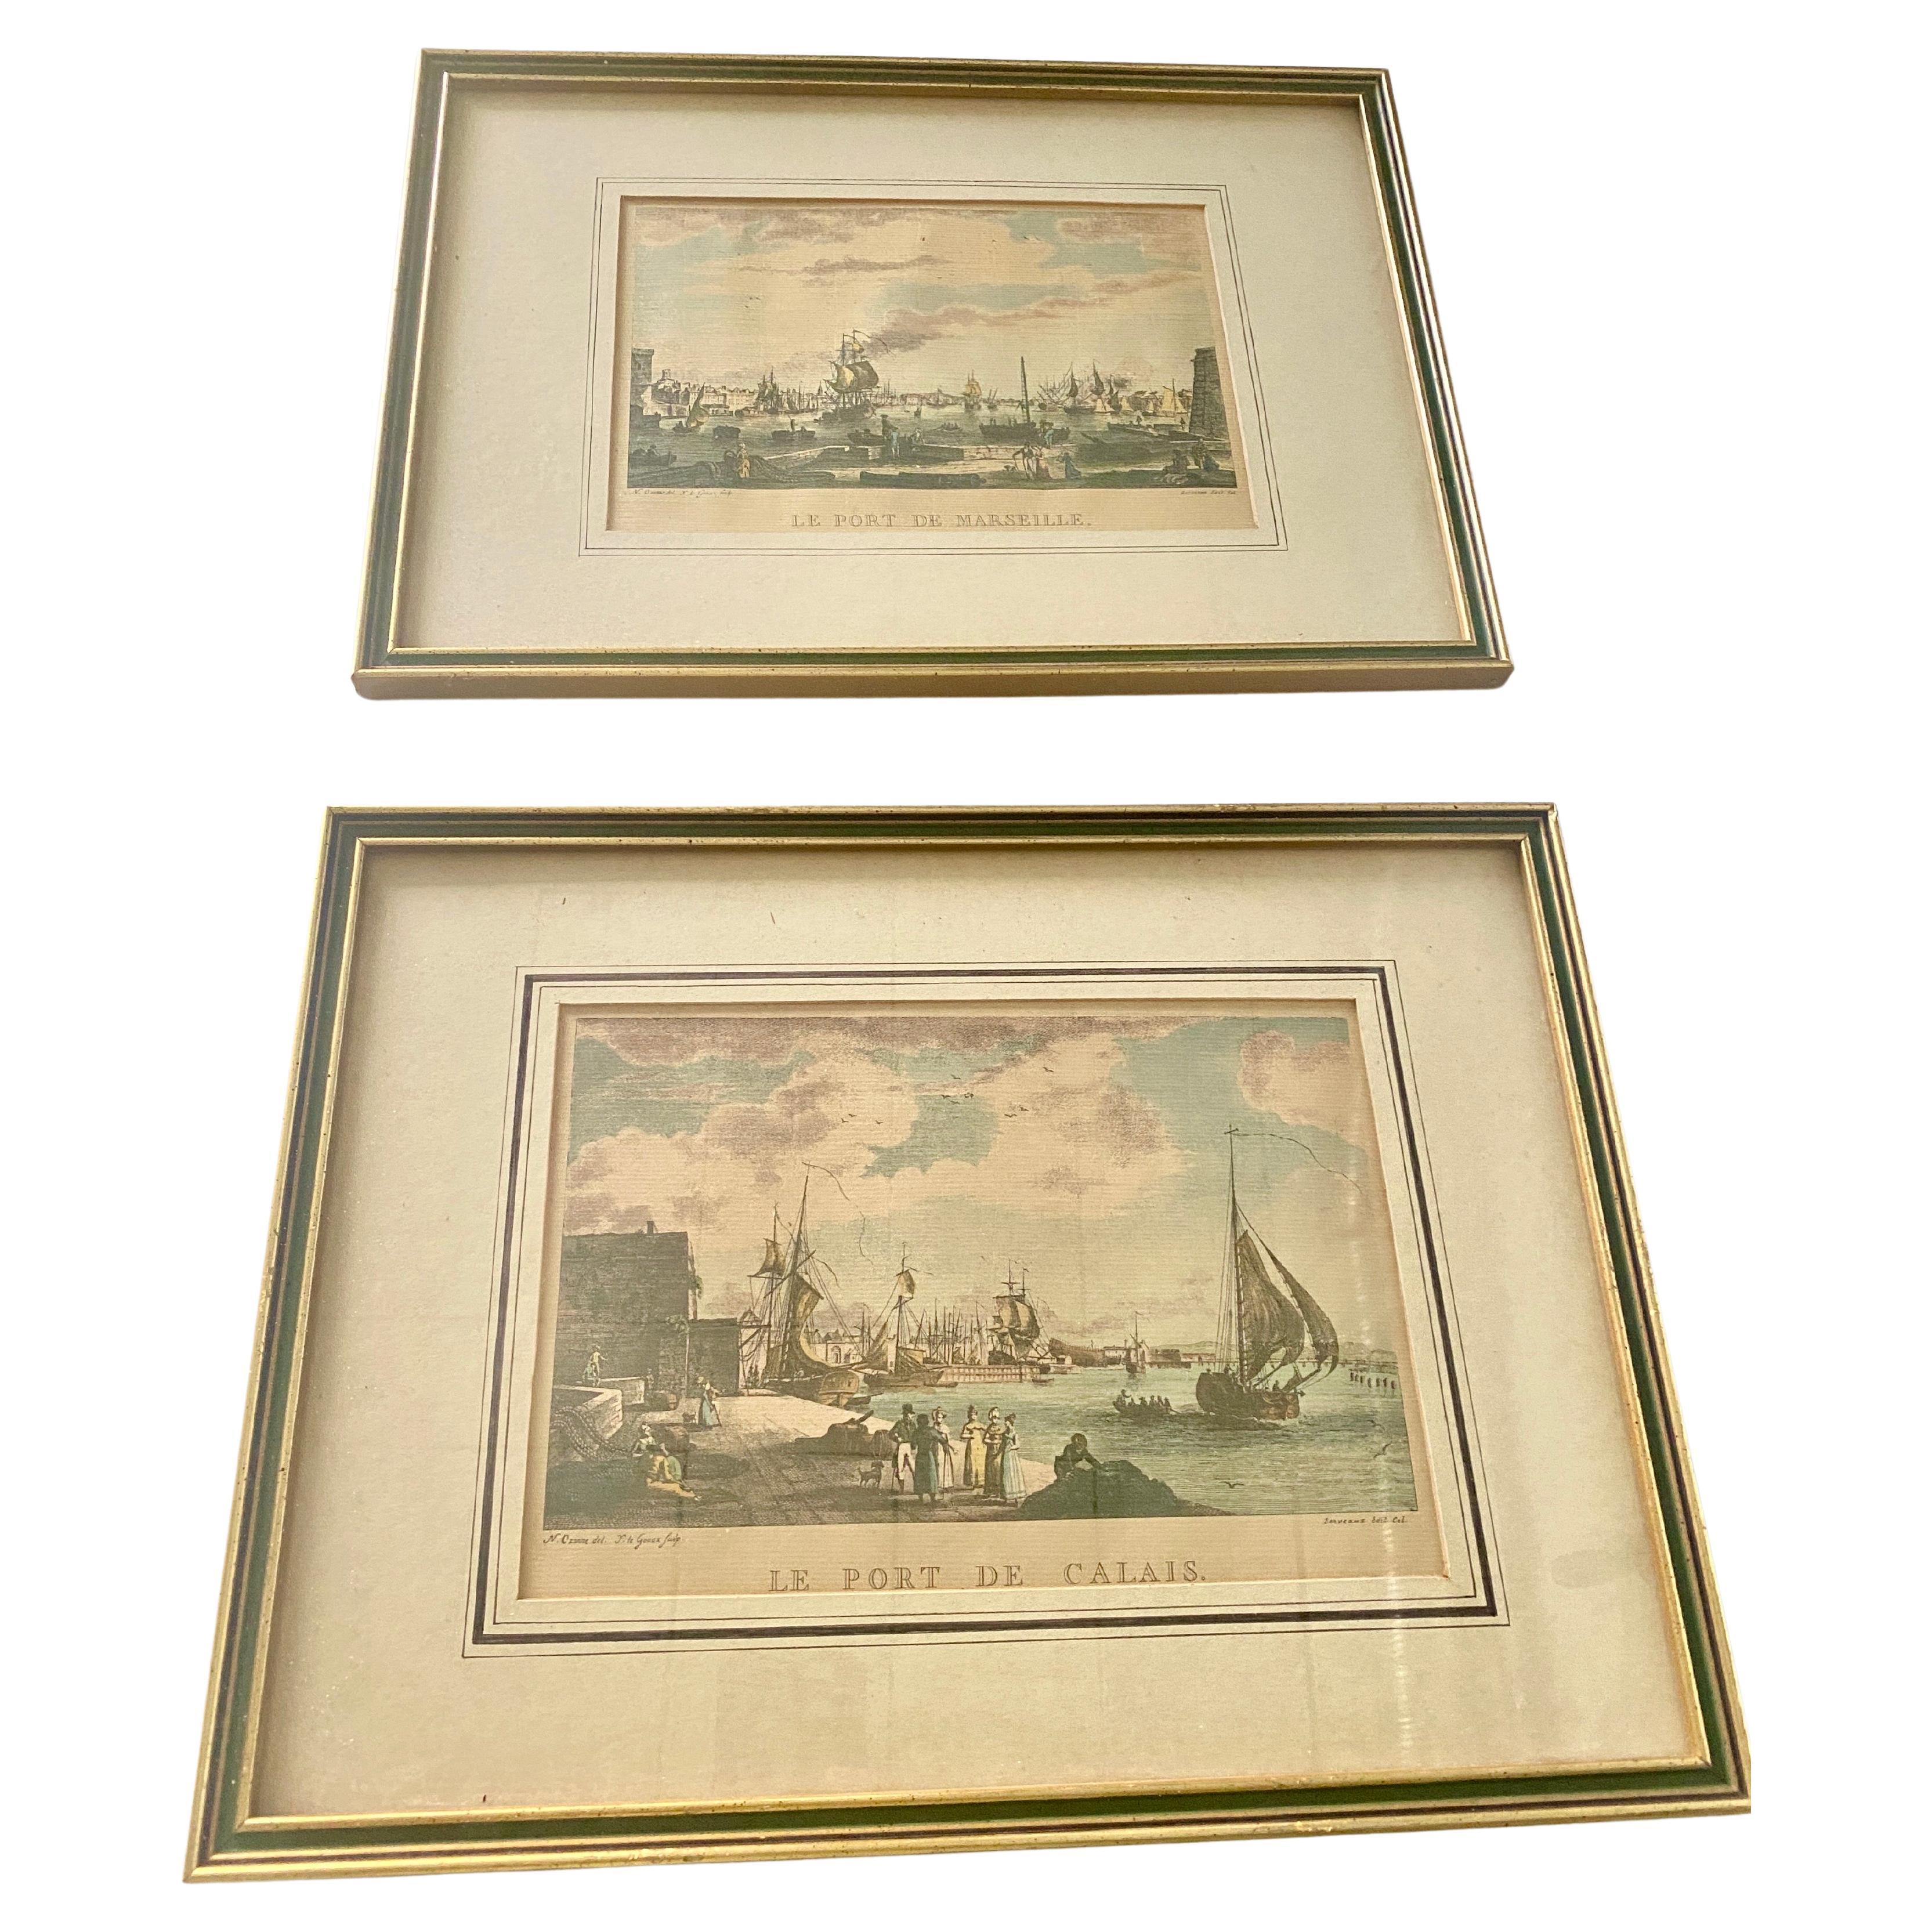 Engravings in Gold Wood Frame, representing French navigation ports, France 19th